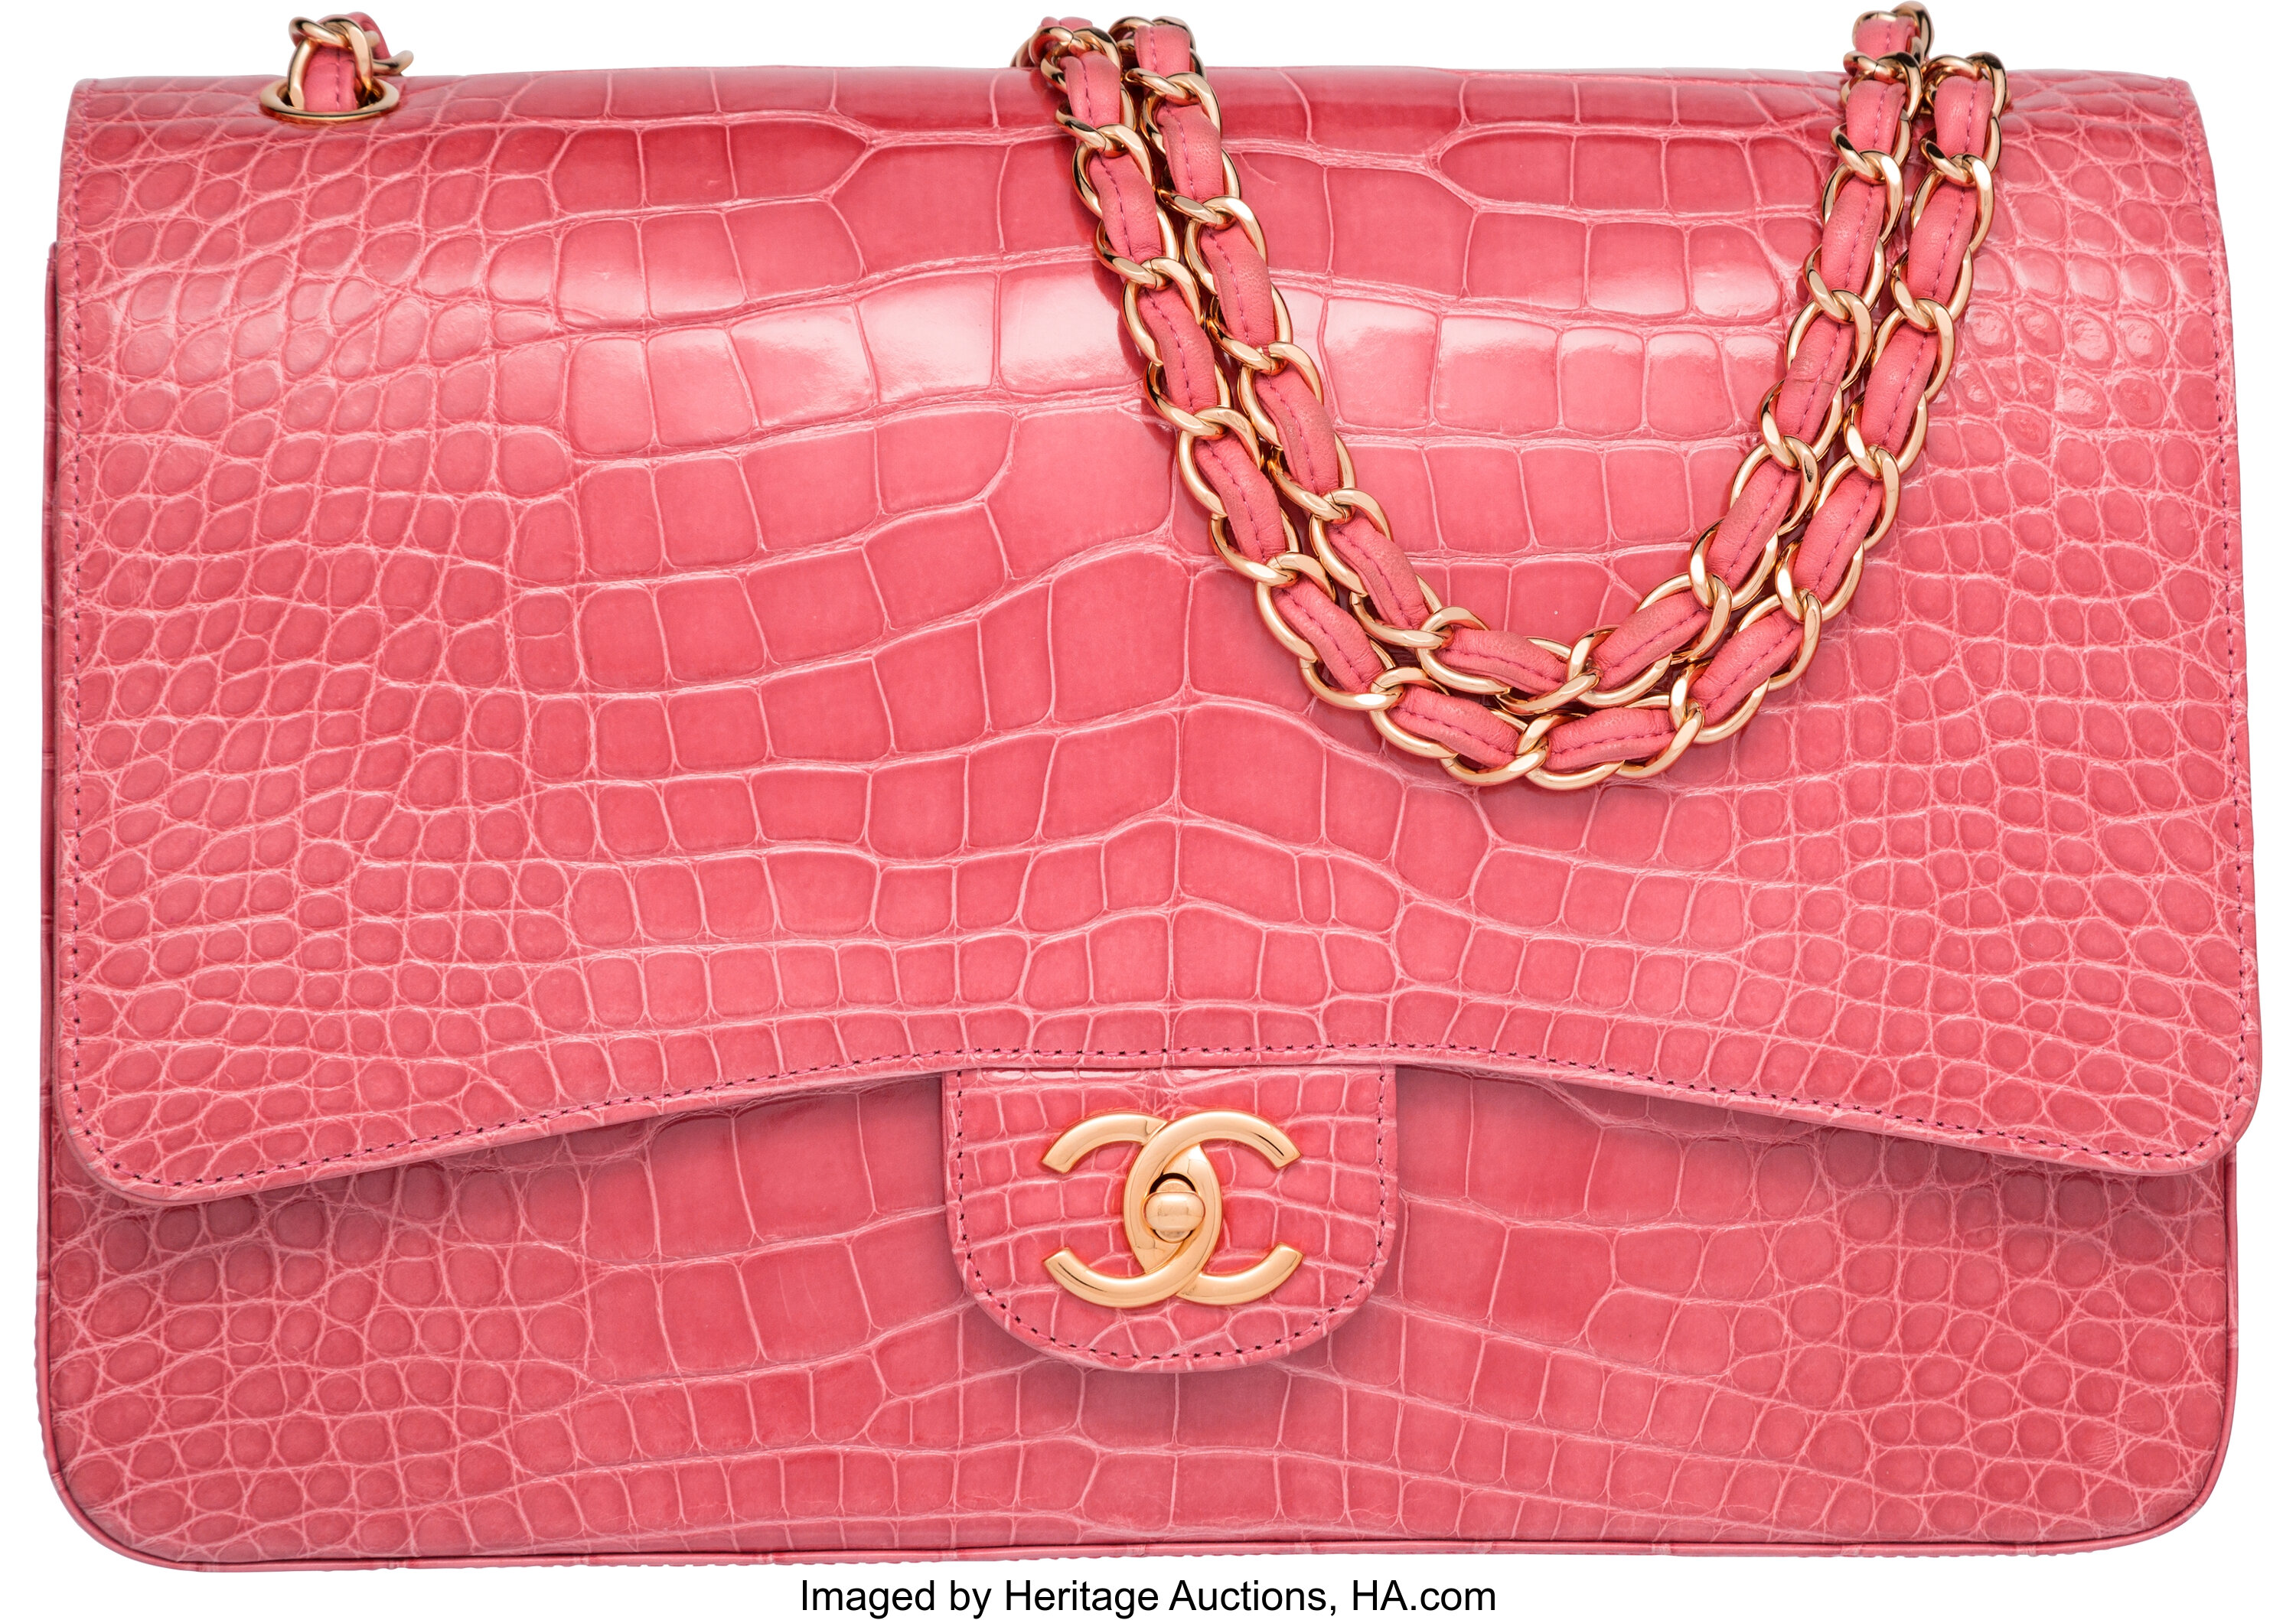 Chanel Shiny Pink Alligator Maxi Double Flap Bag with Gold | Lot #58056 |  Heritage Auctions